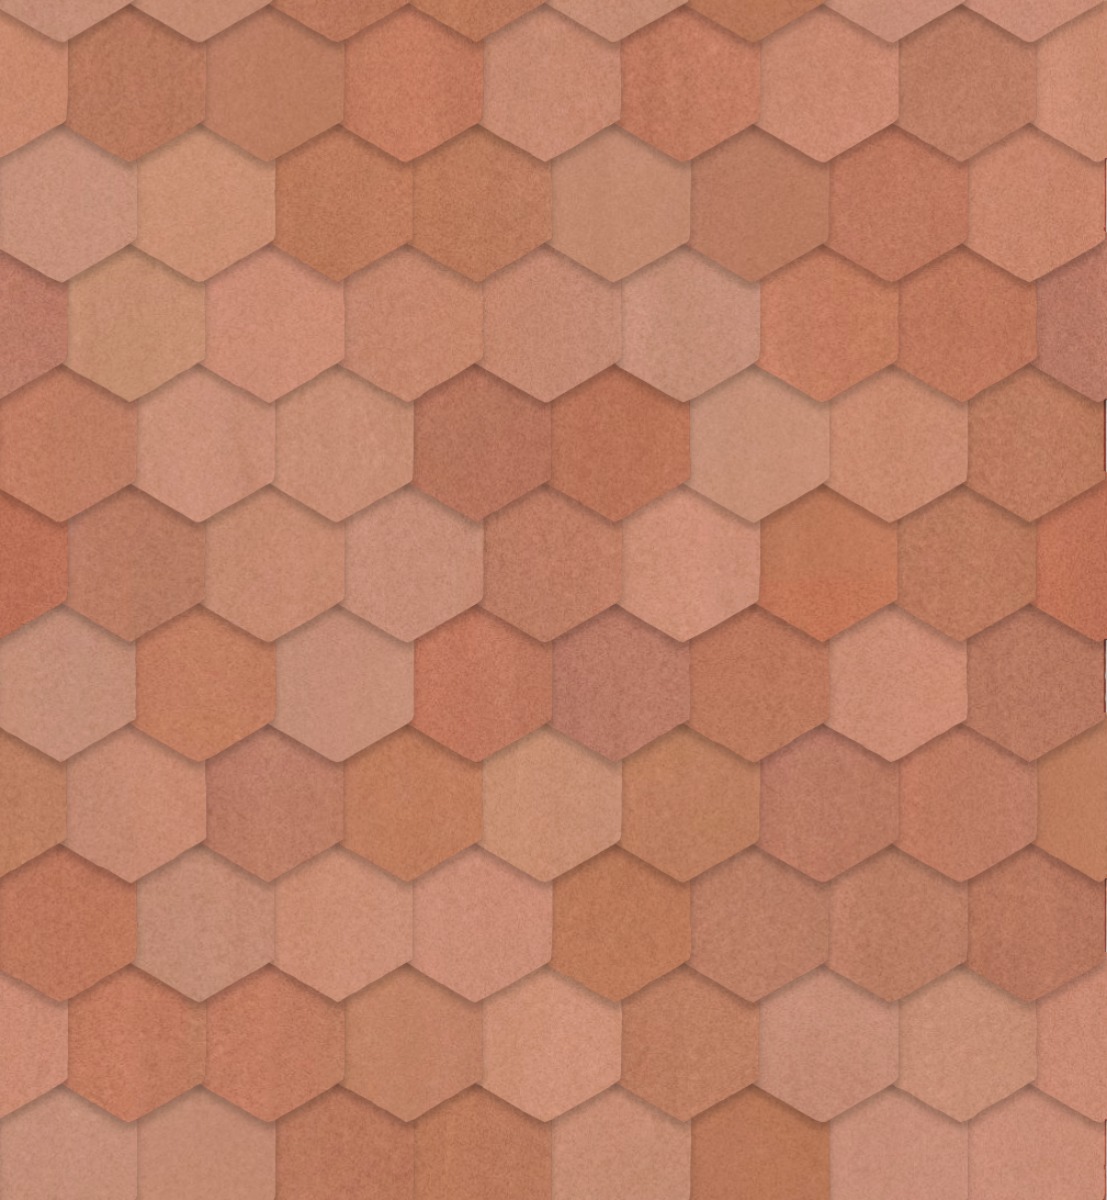 A seamless metal texture with copper sheets arranged in a Hexagonal pattern